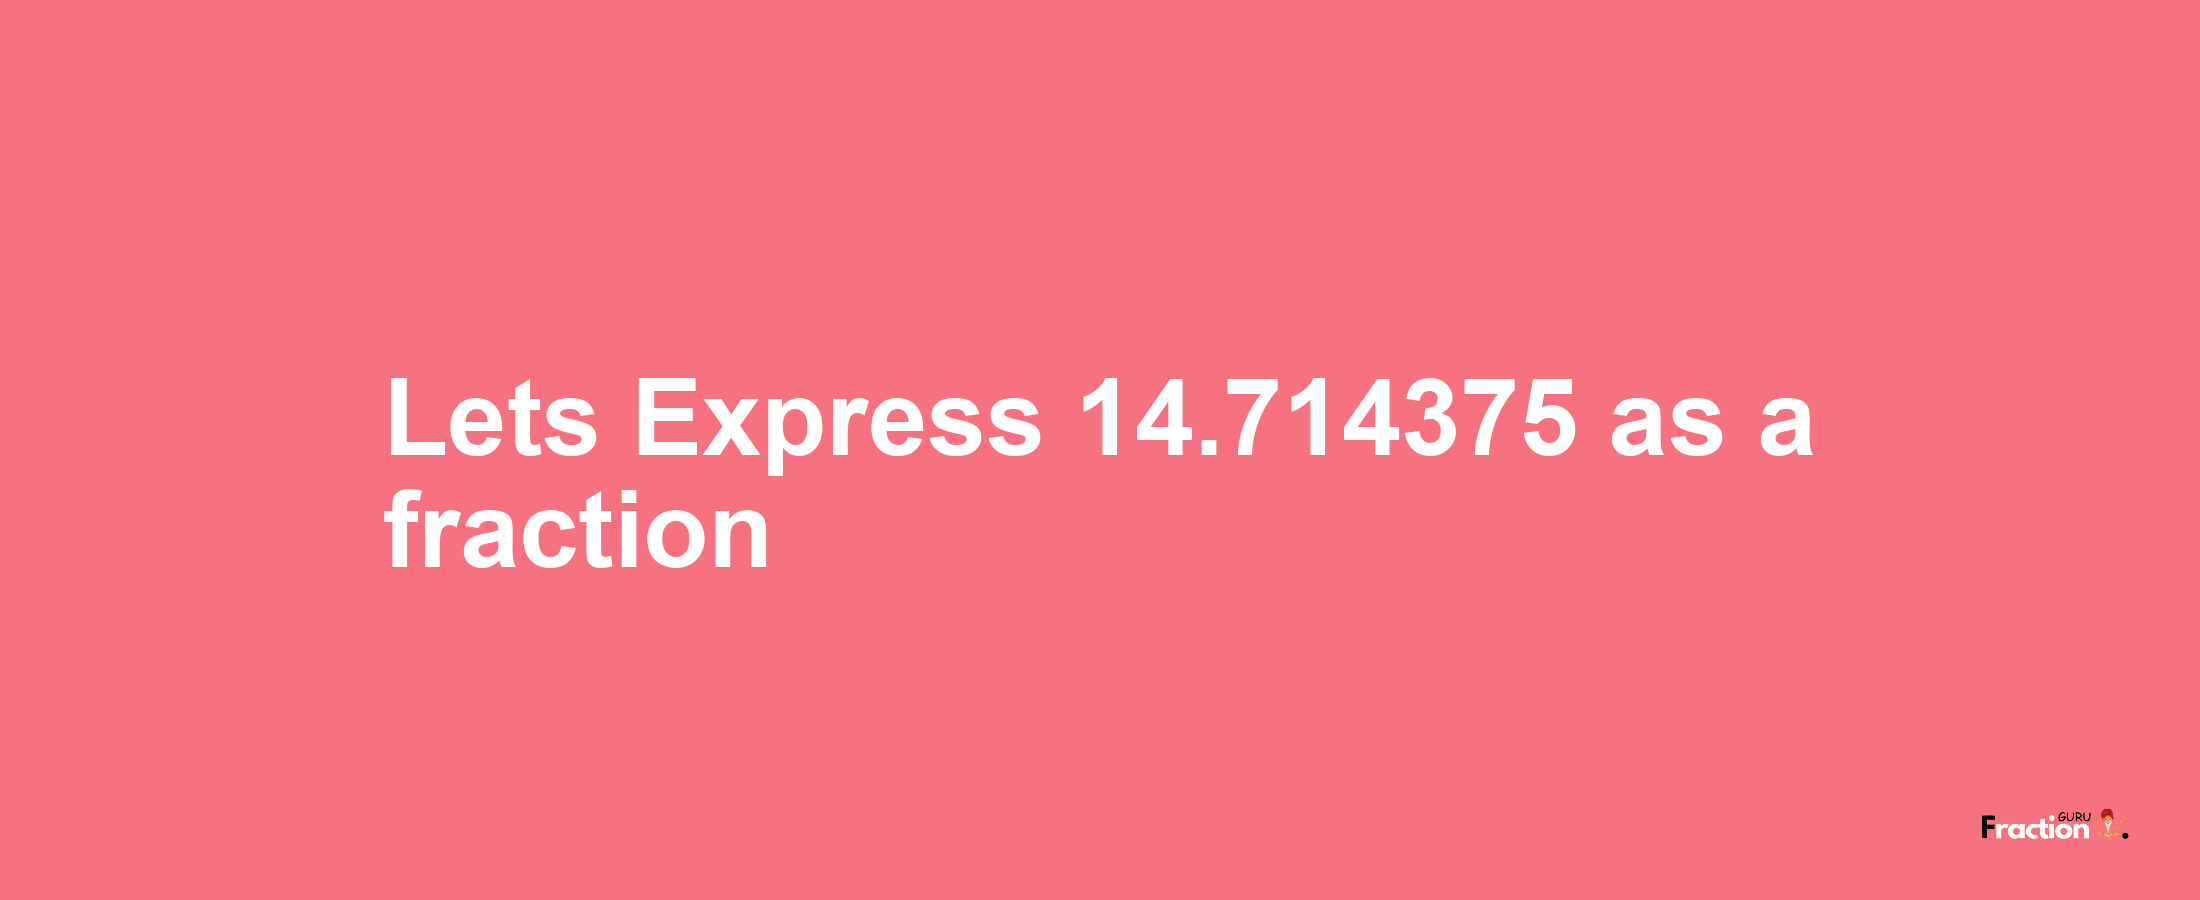 Lets Express 14.714375 as afraction